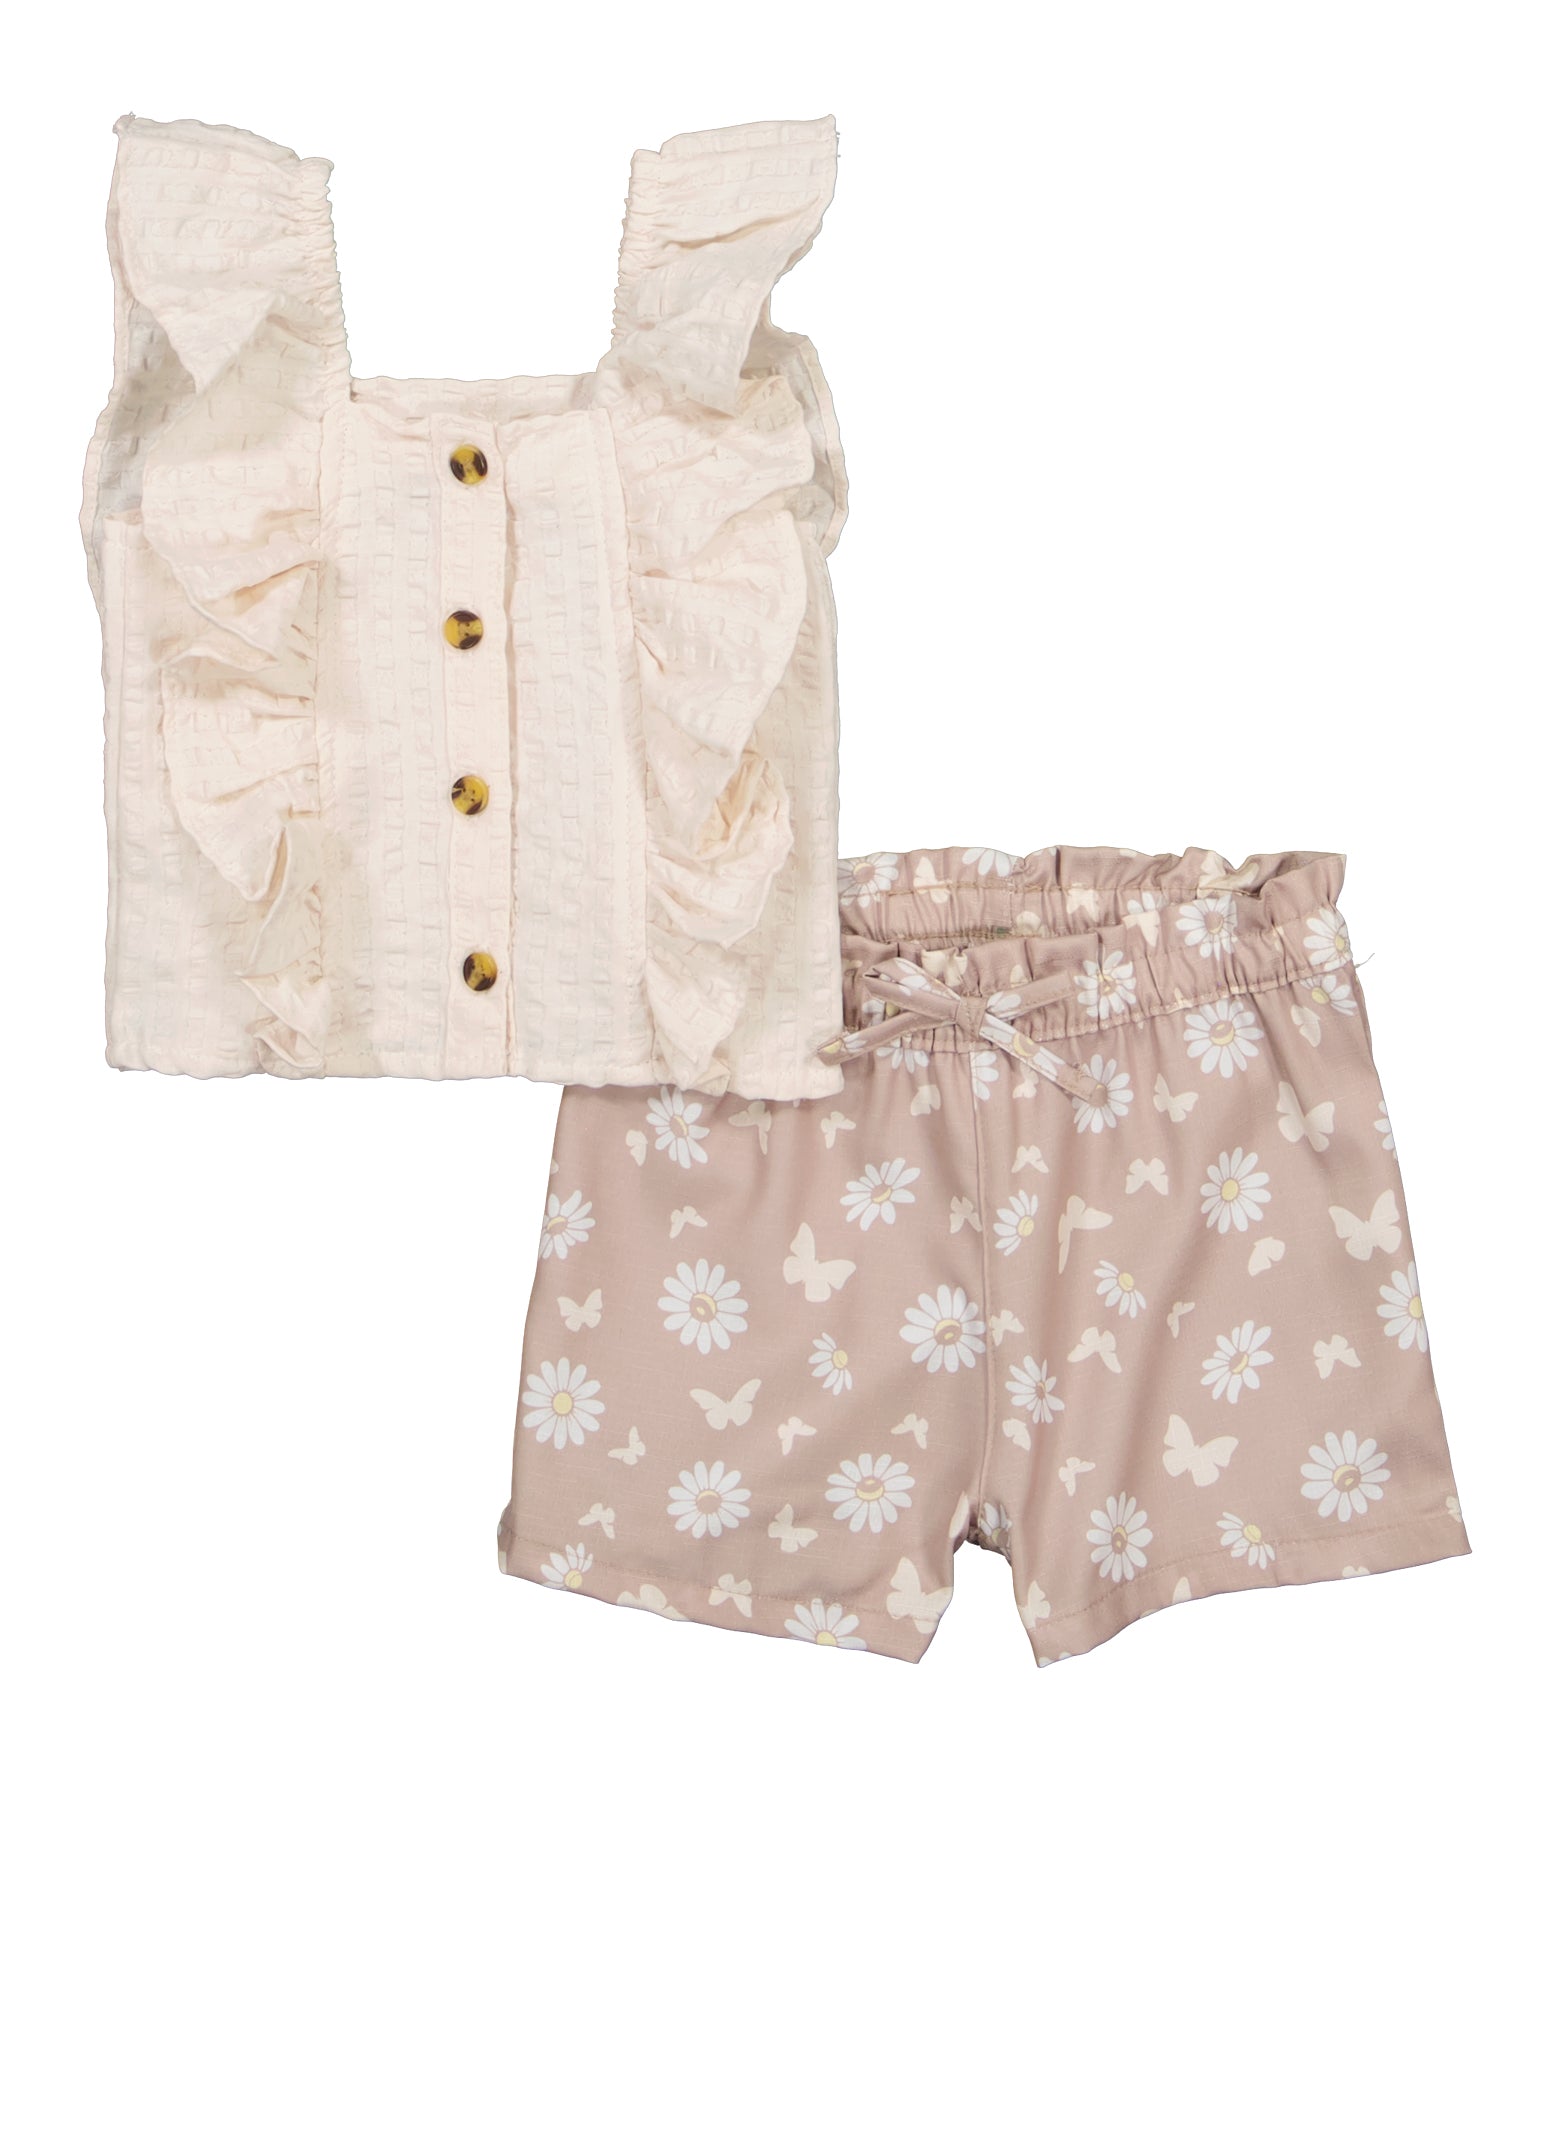 Toddler Girls Linen Button Front Tank Top and Floral Print Shorts, Beige, Size 4T